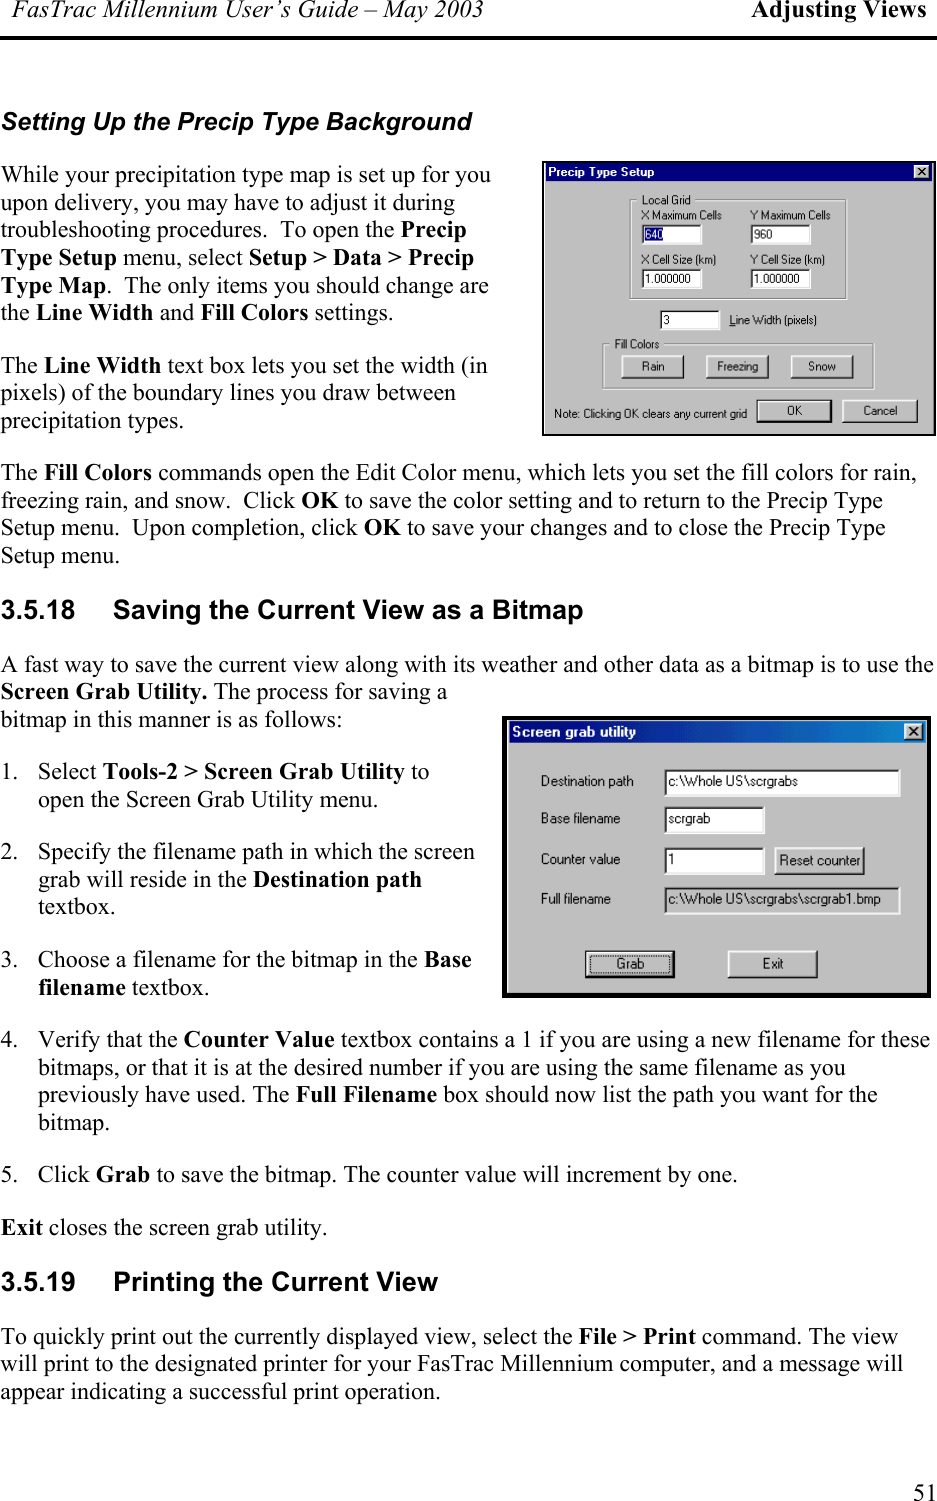 FasTrac Millennium User’s Guide – May 2003 Adjusting Views Setting Up the Precip Type Background While your precipitation type map is set up for you upon delivery, you may have to adjust it during troubleshooting procedures.  To open the Precip Type Setup menu, select Setup &gt; Data &gt; Precip Type Map.  The only items you should change are the Line Width and Fill Colors settings.   The Line Width text box lets you set the width (in pixels) of the boundary lines you draw between precipitation types. The Fill Colors commands open the Edit Color menu, which lets you set the fill colors for rain, freezing rain, and snow.  Click OK to save the color setting and to return to the Precip Type Setup menu.  Upon completion, click OK to save your changes and to close the Precip Type Setup menu. 3.5.18  Saving the Current View as a Bitmap A fast way to save the current view along with its weather and other data as a bitmap is to use the Screen Grab Utility. The process for saving a bitmap in this manner is as follows: 1. Select Tools-2 &gt; Screen Grab Utility to open the Screen Grab Utility menu. 2.  Specify the filename path in which the screen grab will reside in the Destination path textbox.   3.  Choose a filename for the bitmap in the Base filename textbox. 4.  Verify that the Counter Value textbox contains a 1 if you are using a new filename for these bitmaps, or that it is at the desired number if you are using the same filename as you previously have used. The Full Filename box should now list the path you want for the bitmap. 5. Click Grab to save the bitmap. The counter value will increment by one. Exit closes the screen grab utility. 3.5.19  Printing the Current View To quickly print out the currently displayed view, select the File &gt; Print command. The view will print to the designated printer for your FasTrac Millennium computer, and a message will appear indicating a successful print operation. 51 